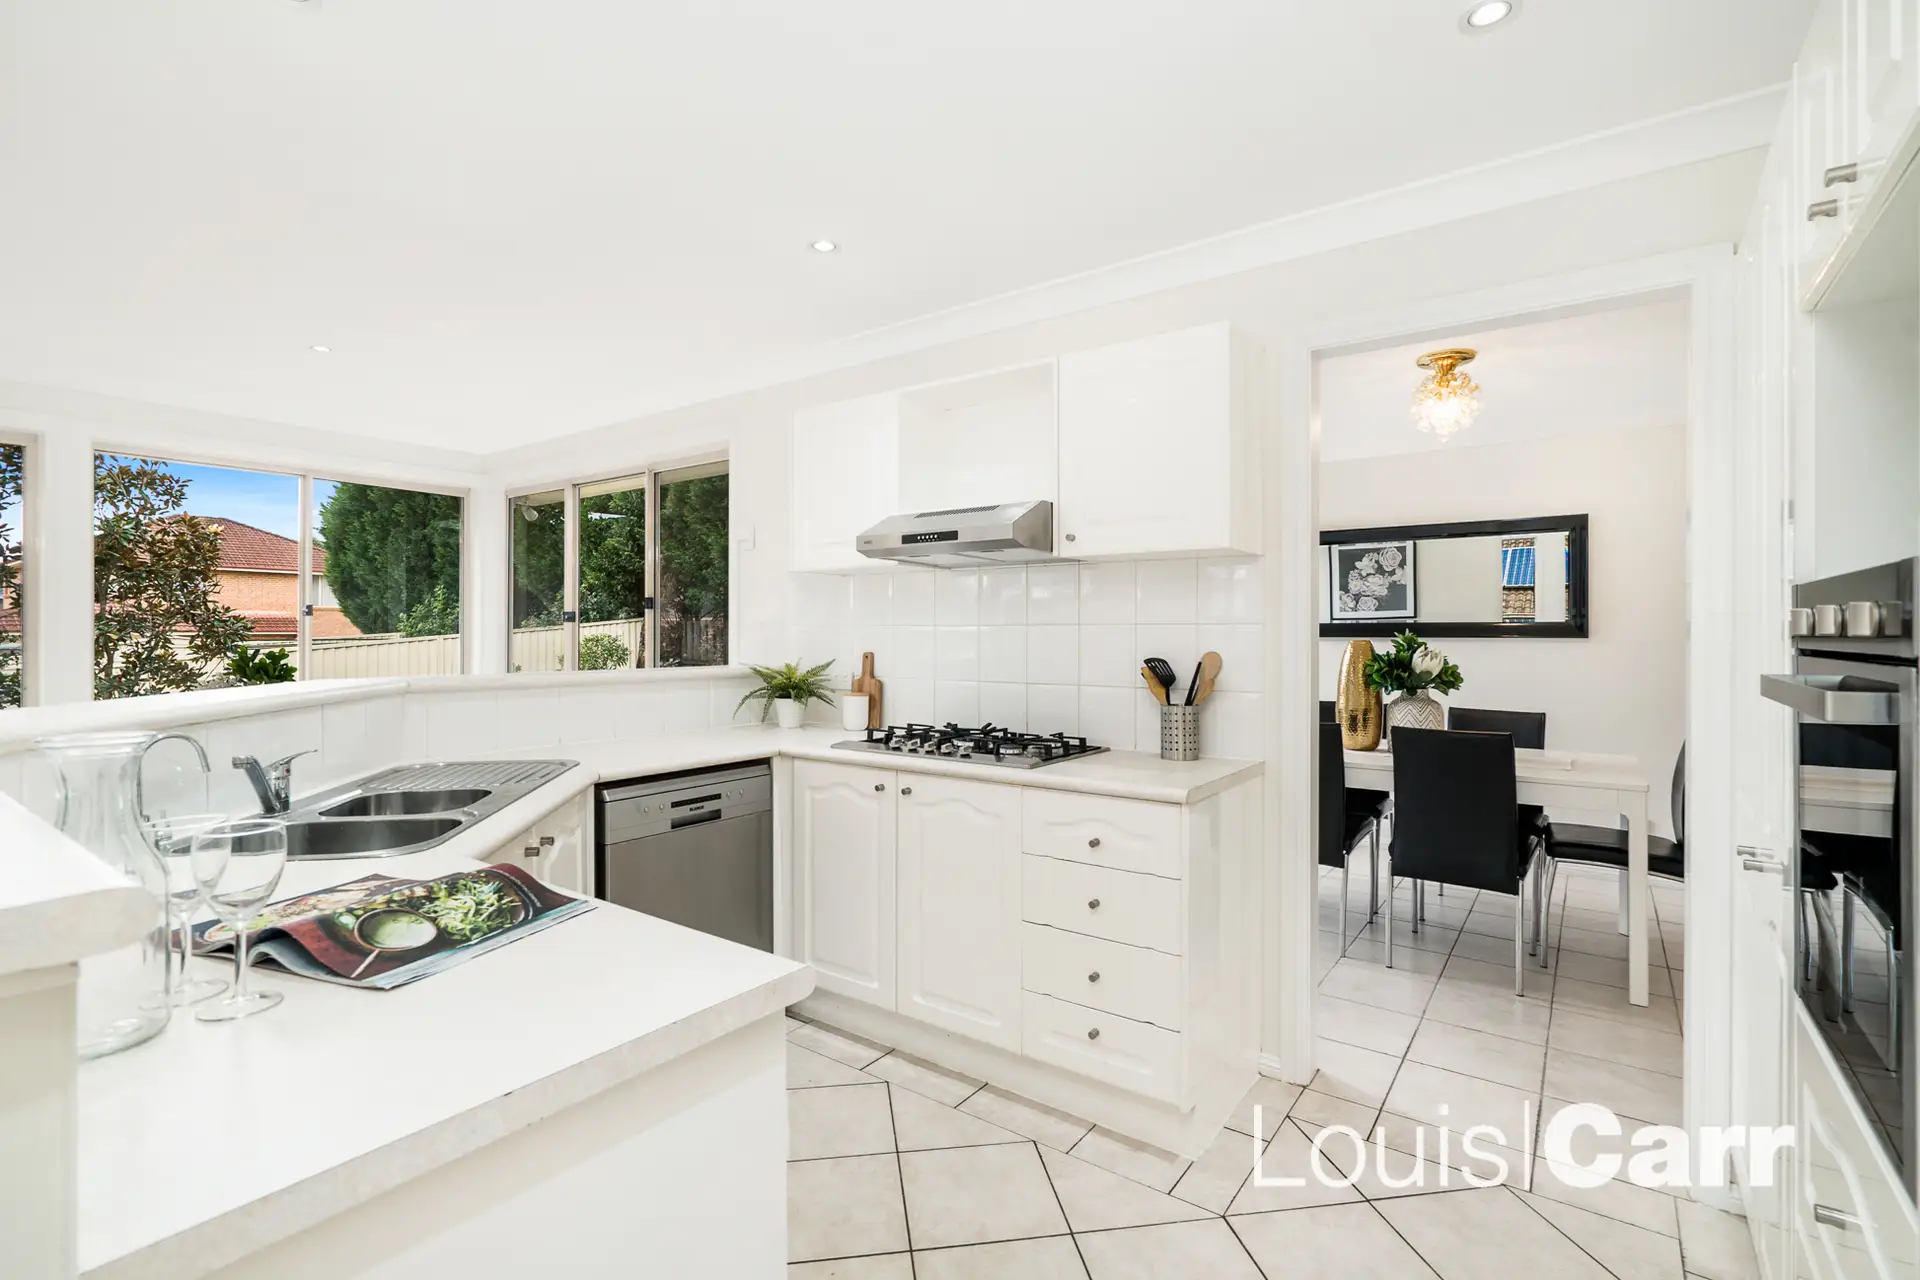 Photo #3: 3 McCusker Crescent, Cherrybrook - Sold by Louis Carr Real Estate